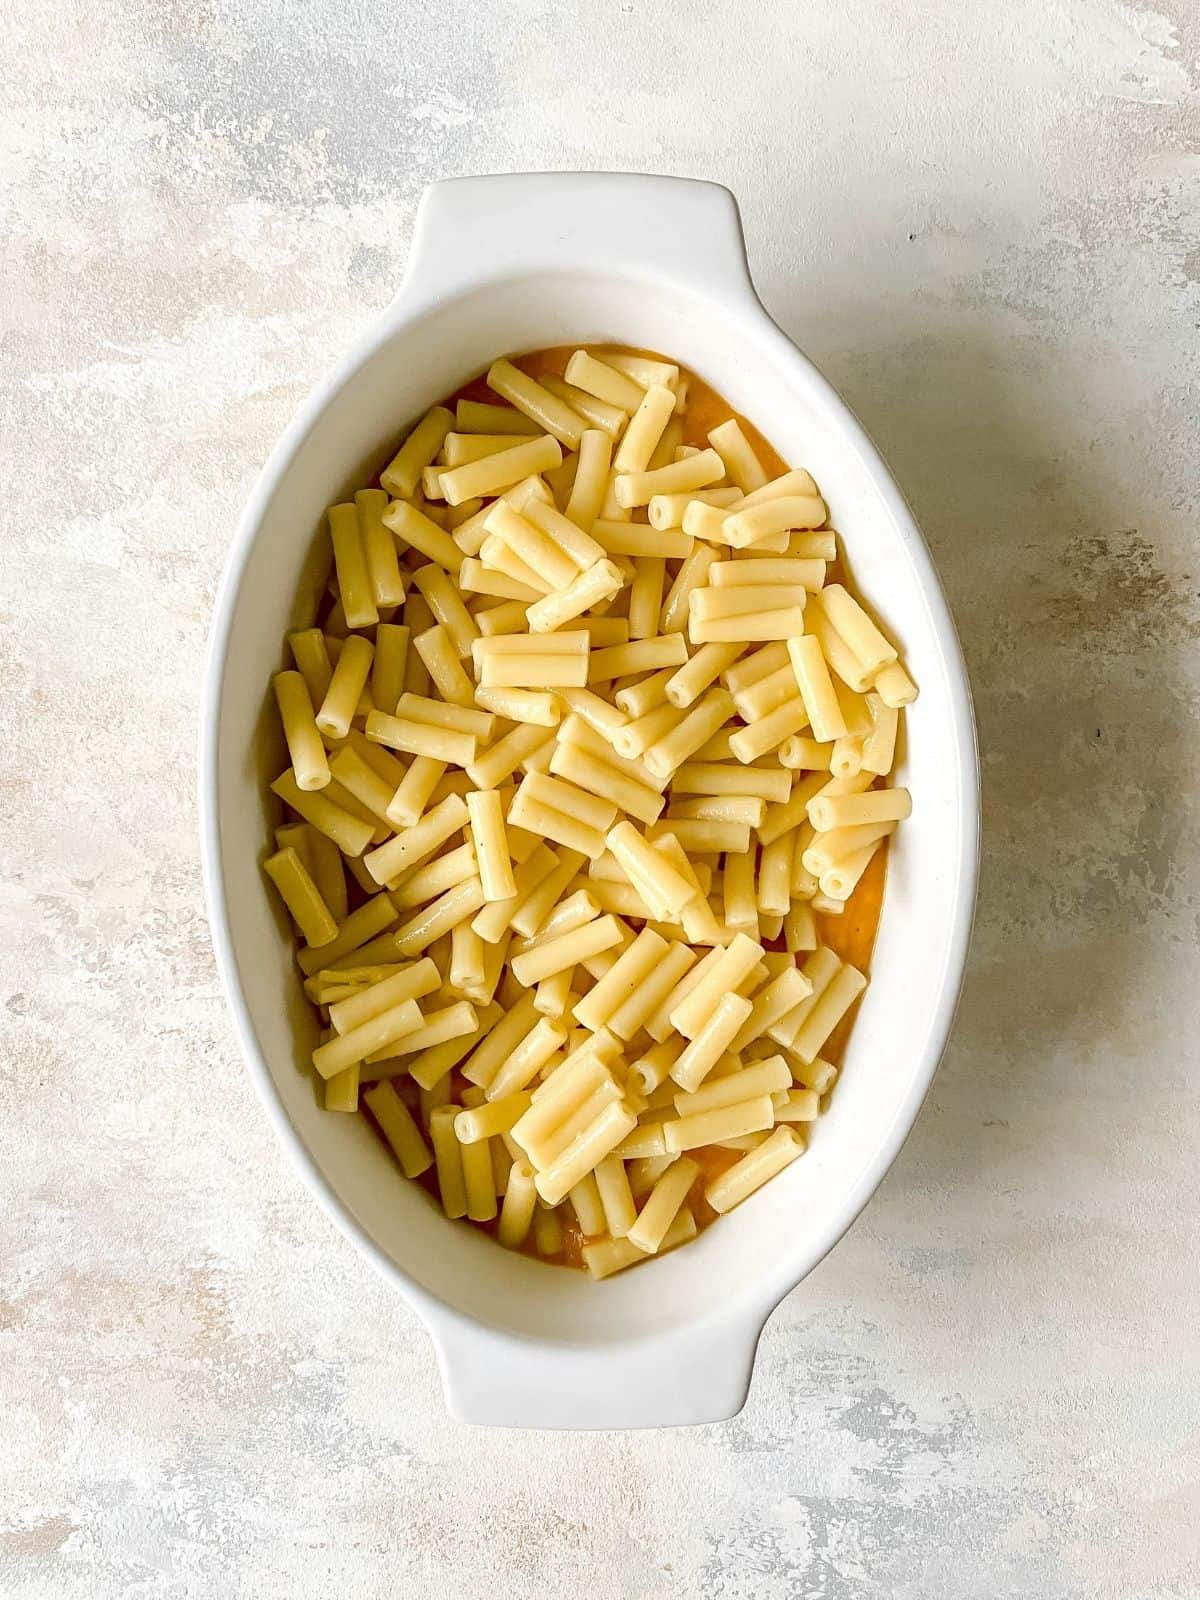 butternut squash sauce and pasta in a white dish.